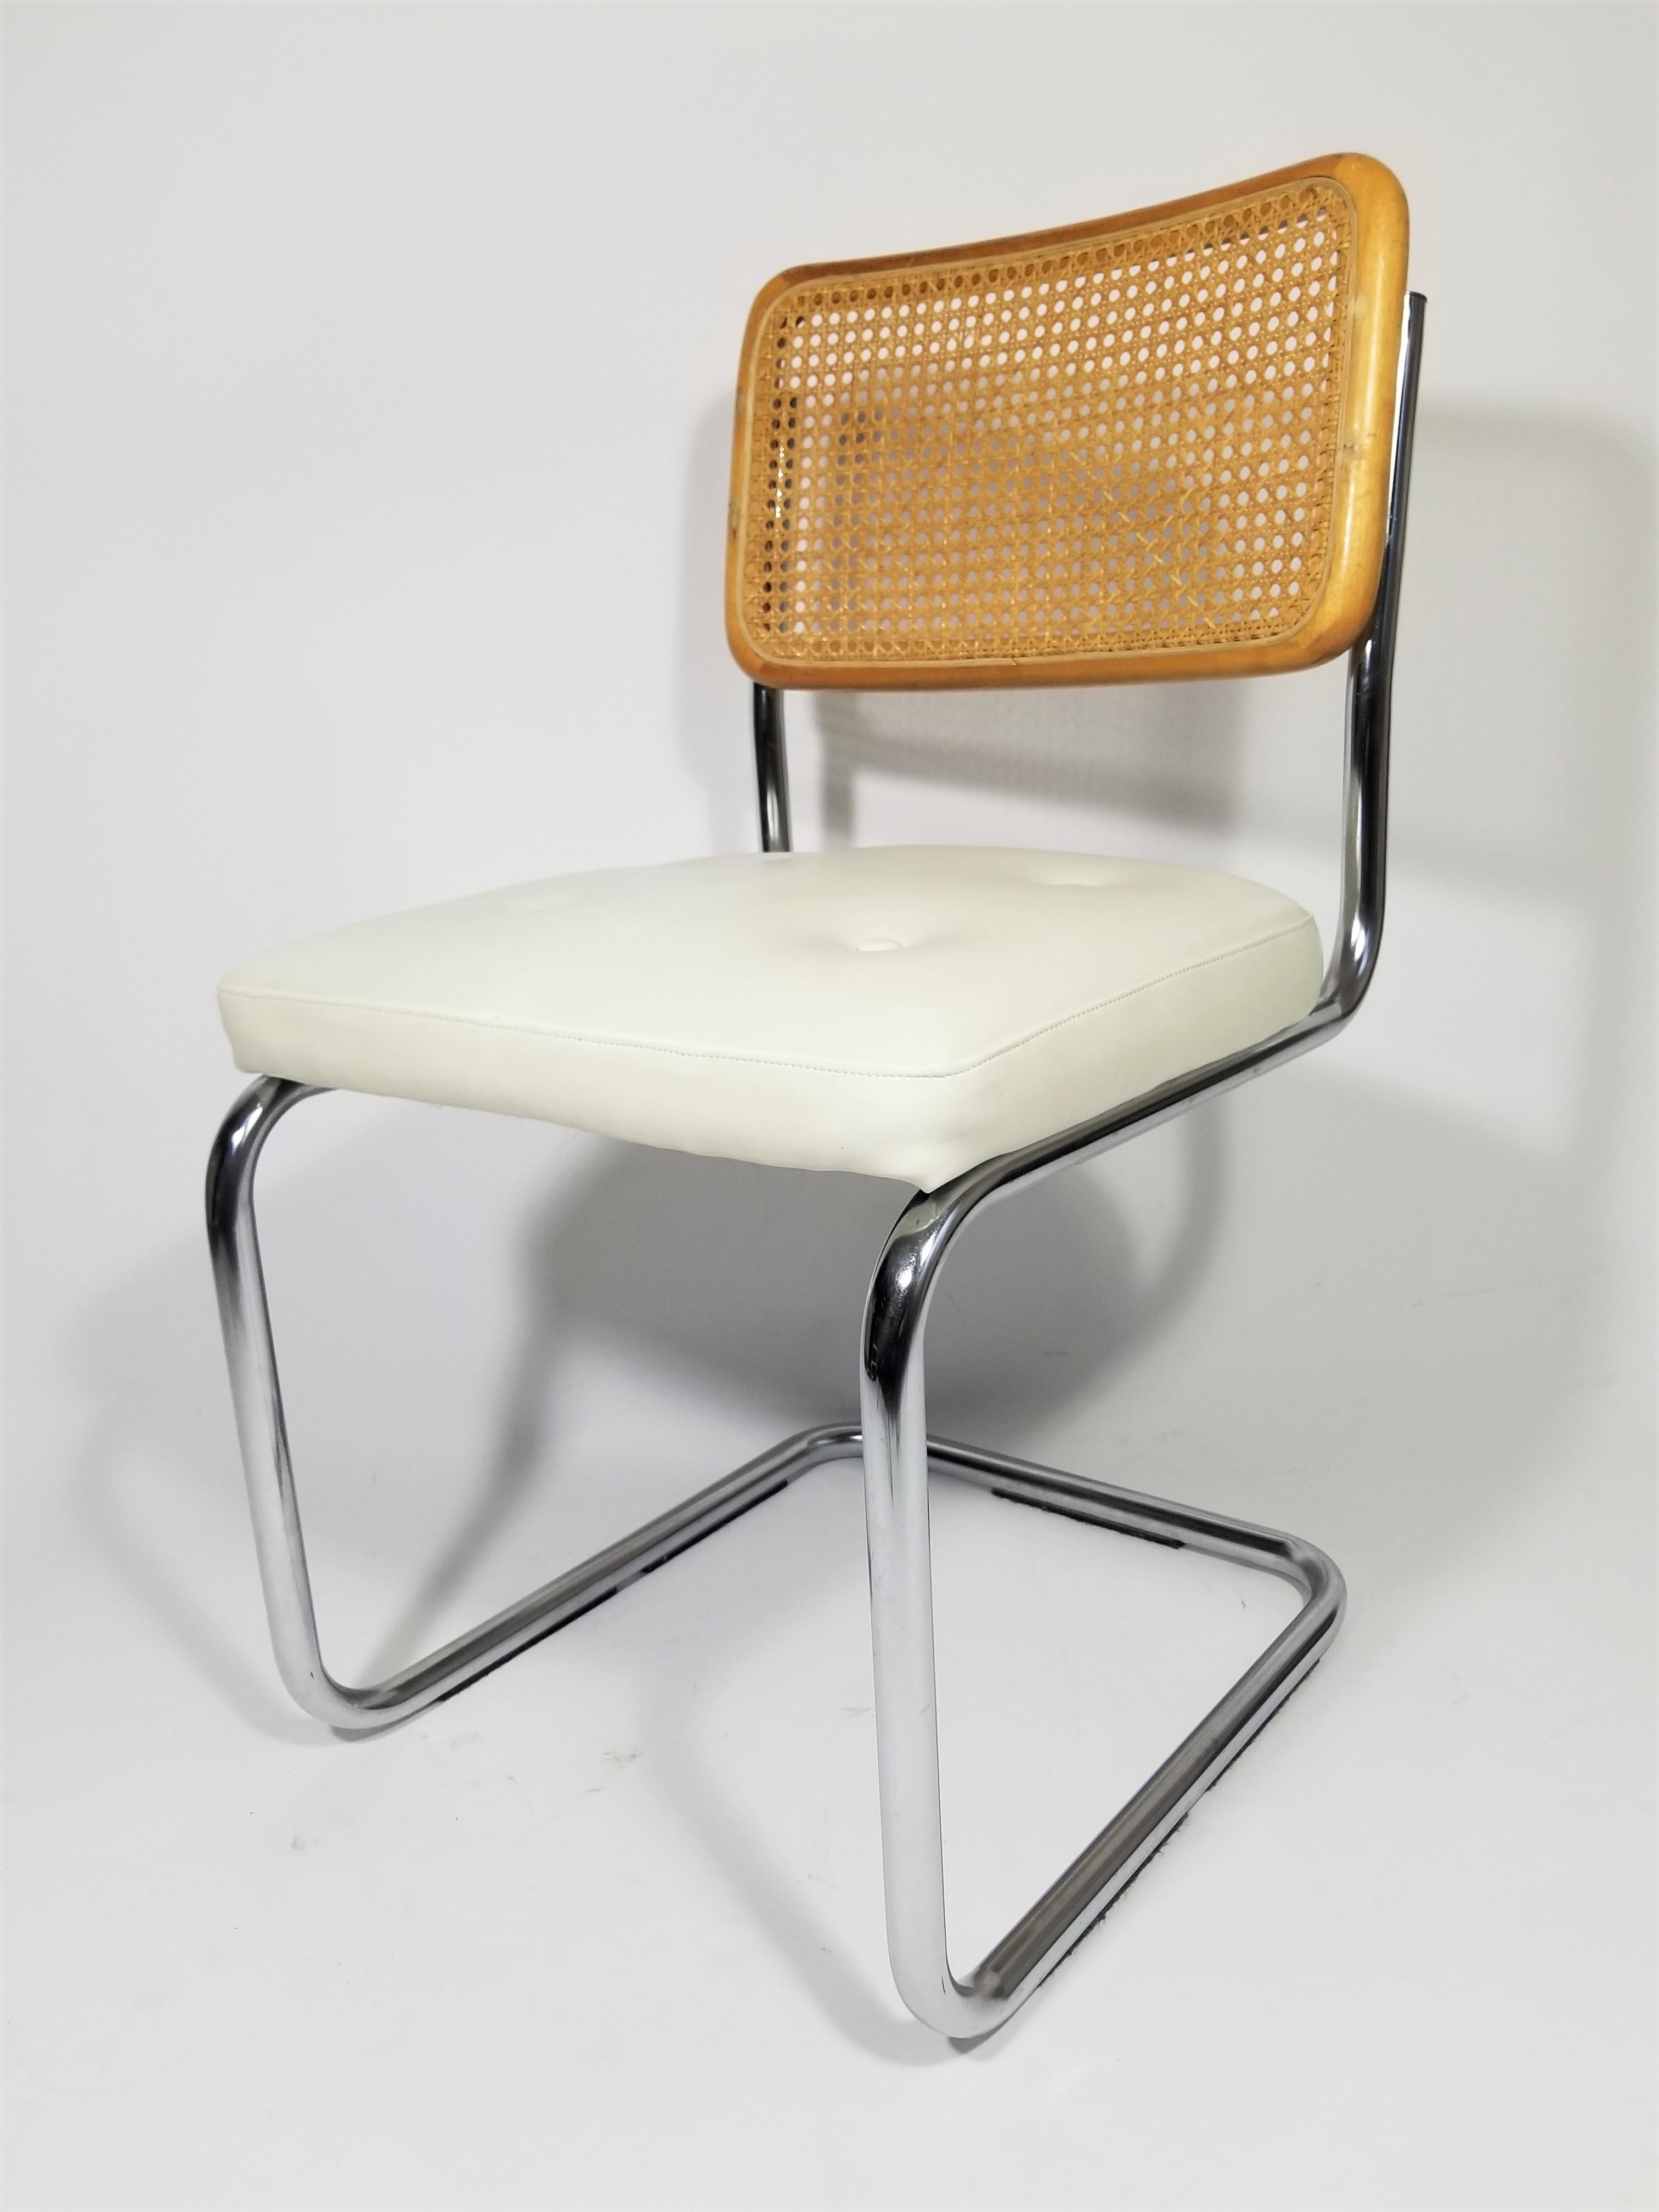 Midcentury Marcel Breuer Cesca side chair. Classic chrome steel frame. Cane back. White vinyl upholstered seat with covered buttons. This is a perfect Cesca chair for frequent sitting like a desk, vanity.
Complimentary delivery can be arranged for